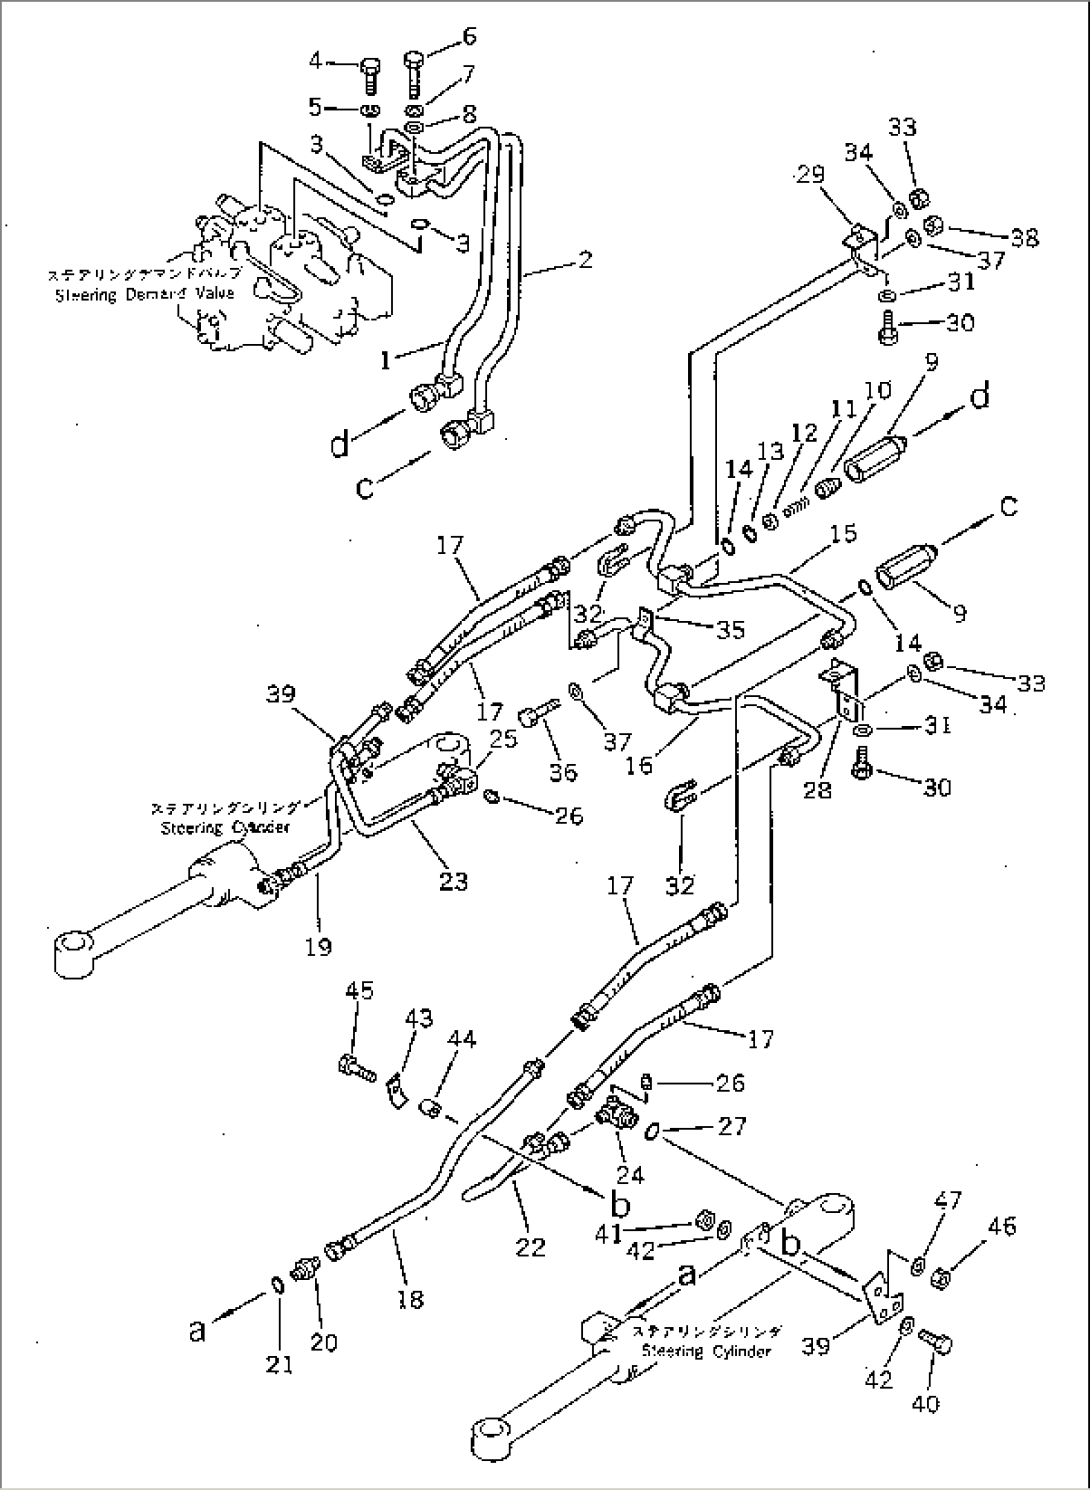 STEERING OIL PIPING(#10042-19999)